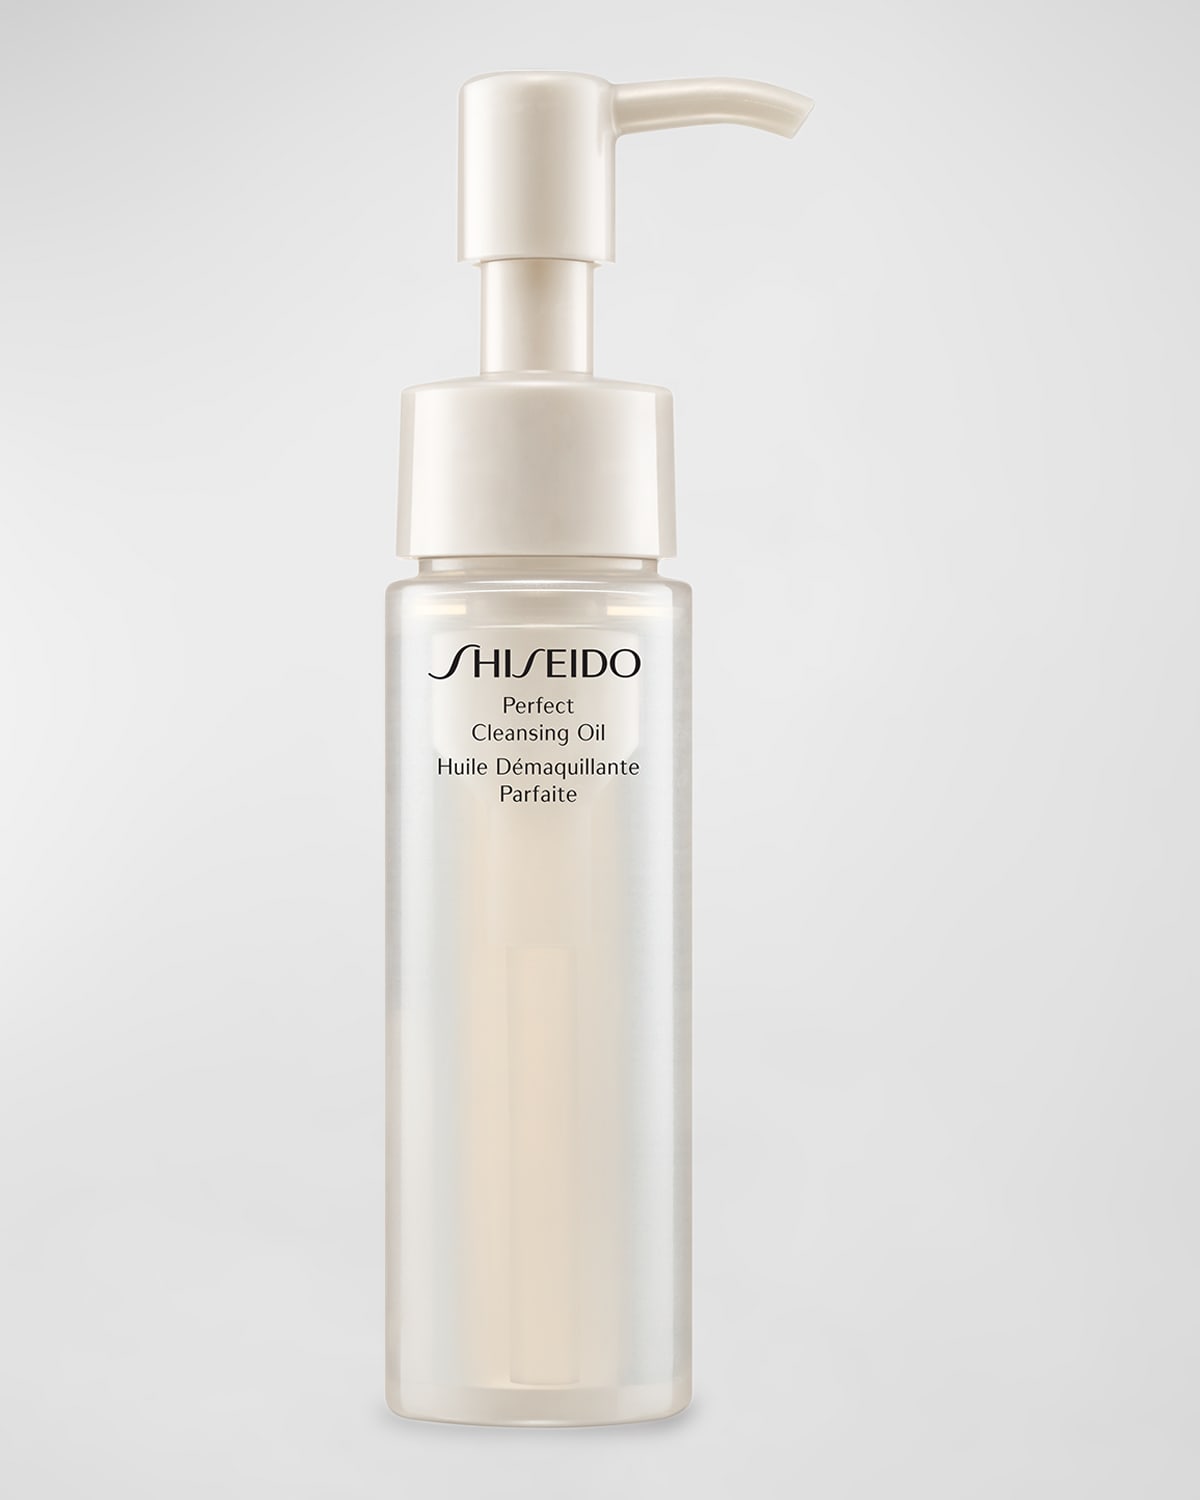 Perfect Cleansing Oil, 1.3 oz. - Yours with any $75 Shiseido Purchase